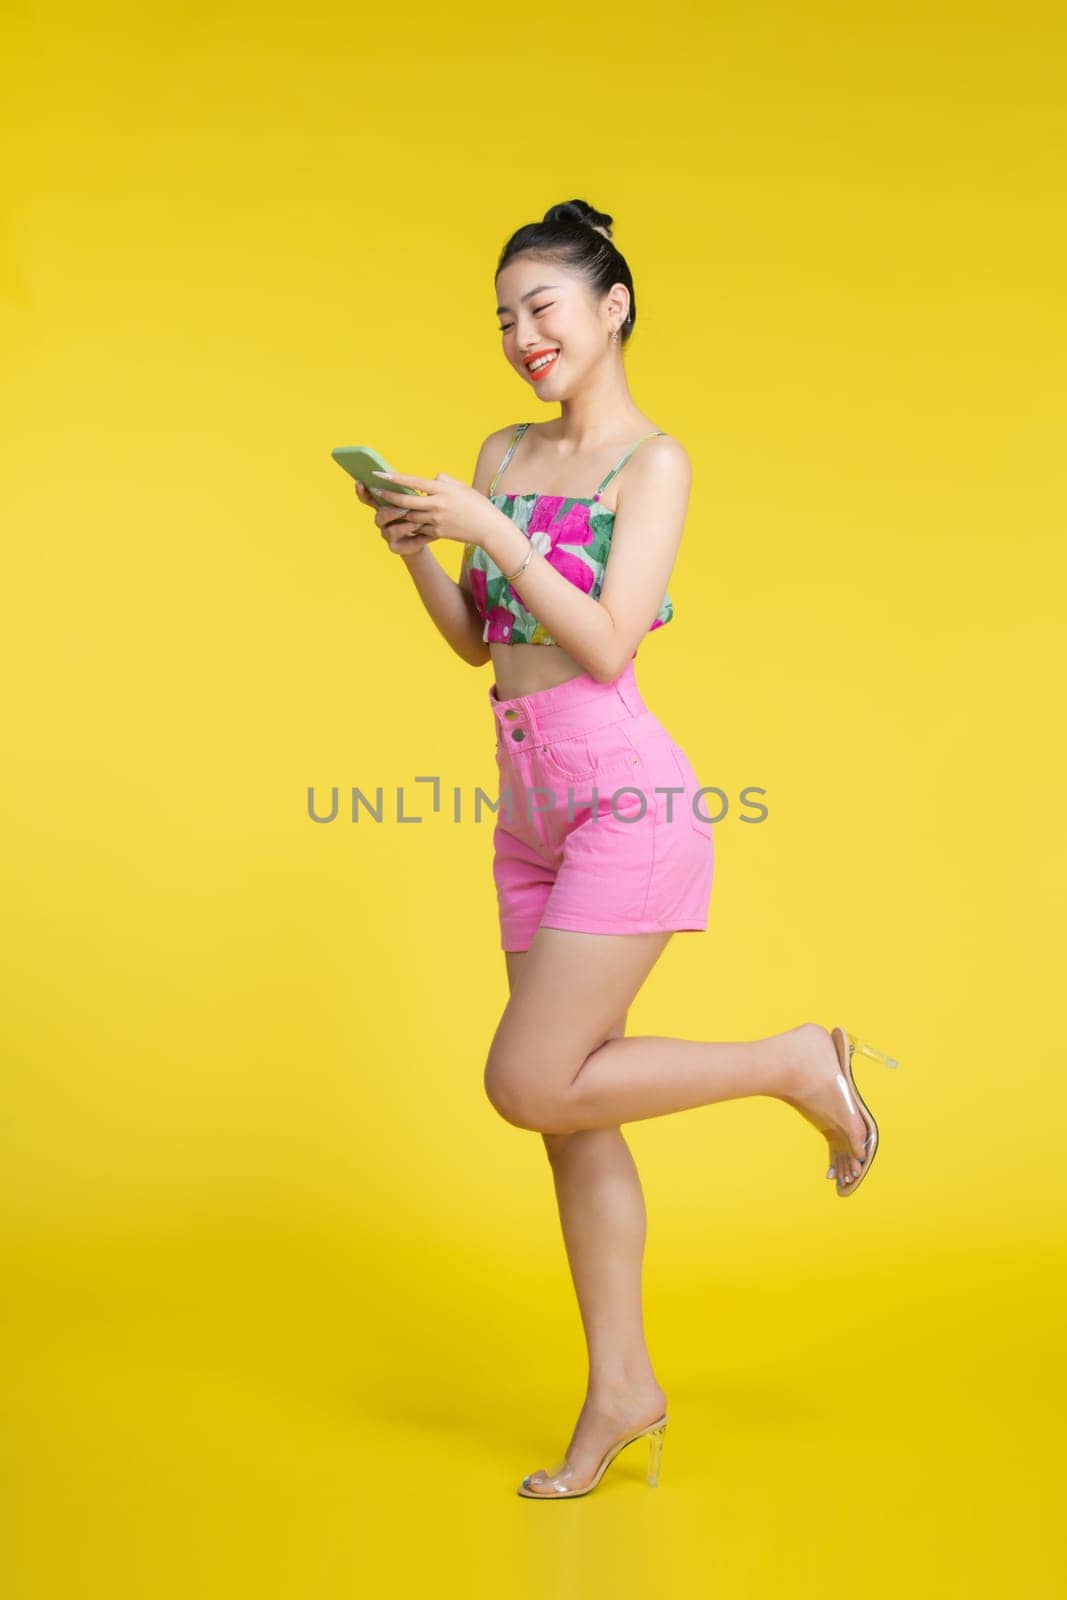 Smiling asian woman holding smartphone and looking at the camera over yellow background by makidotvn